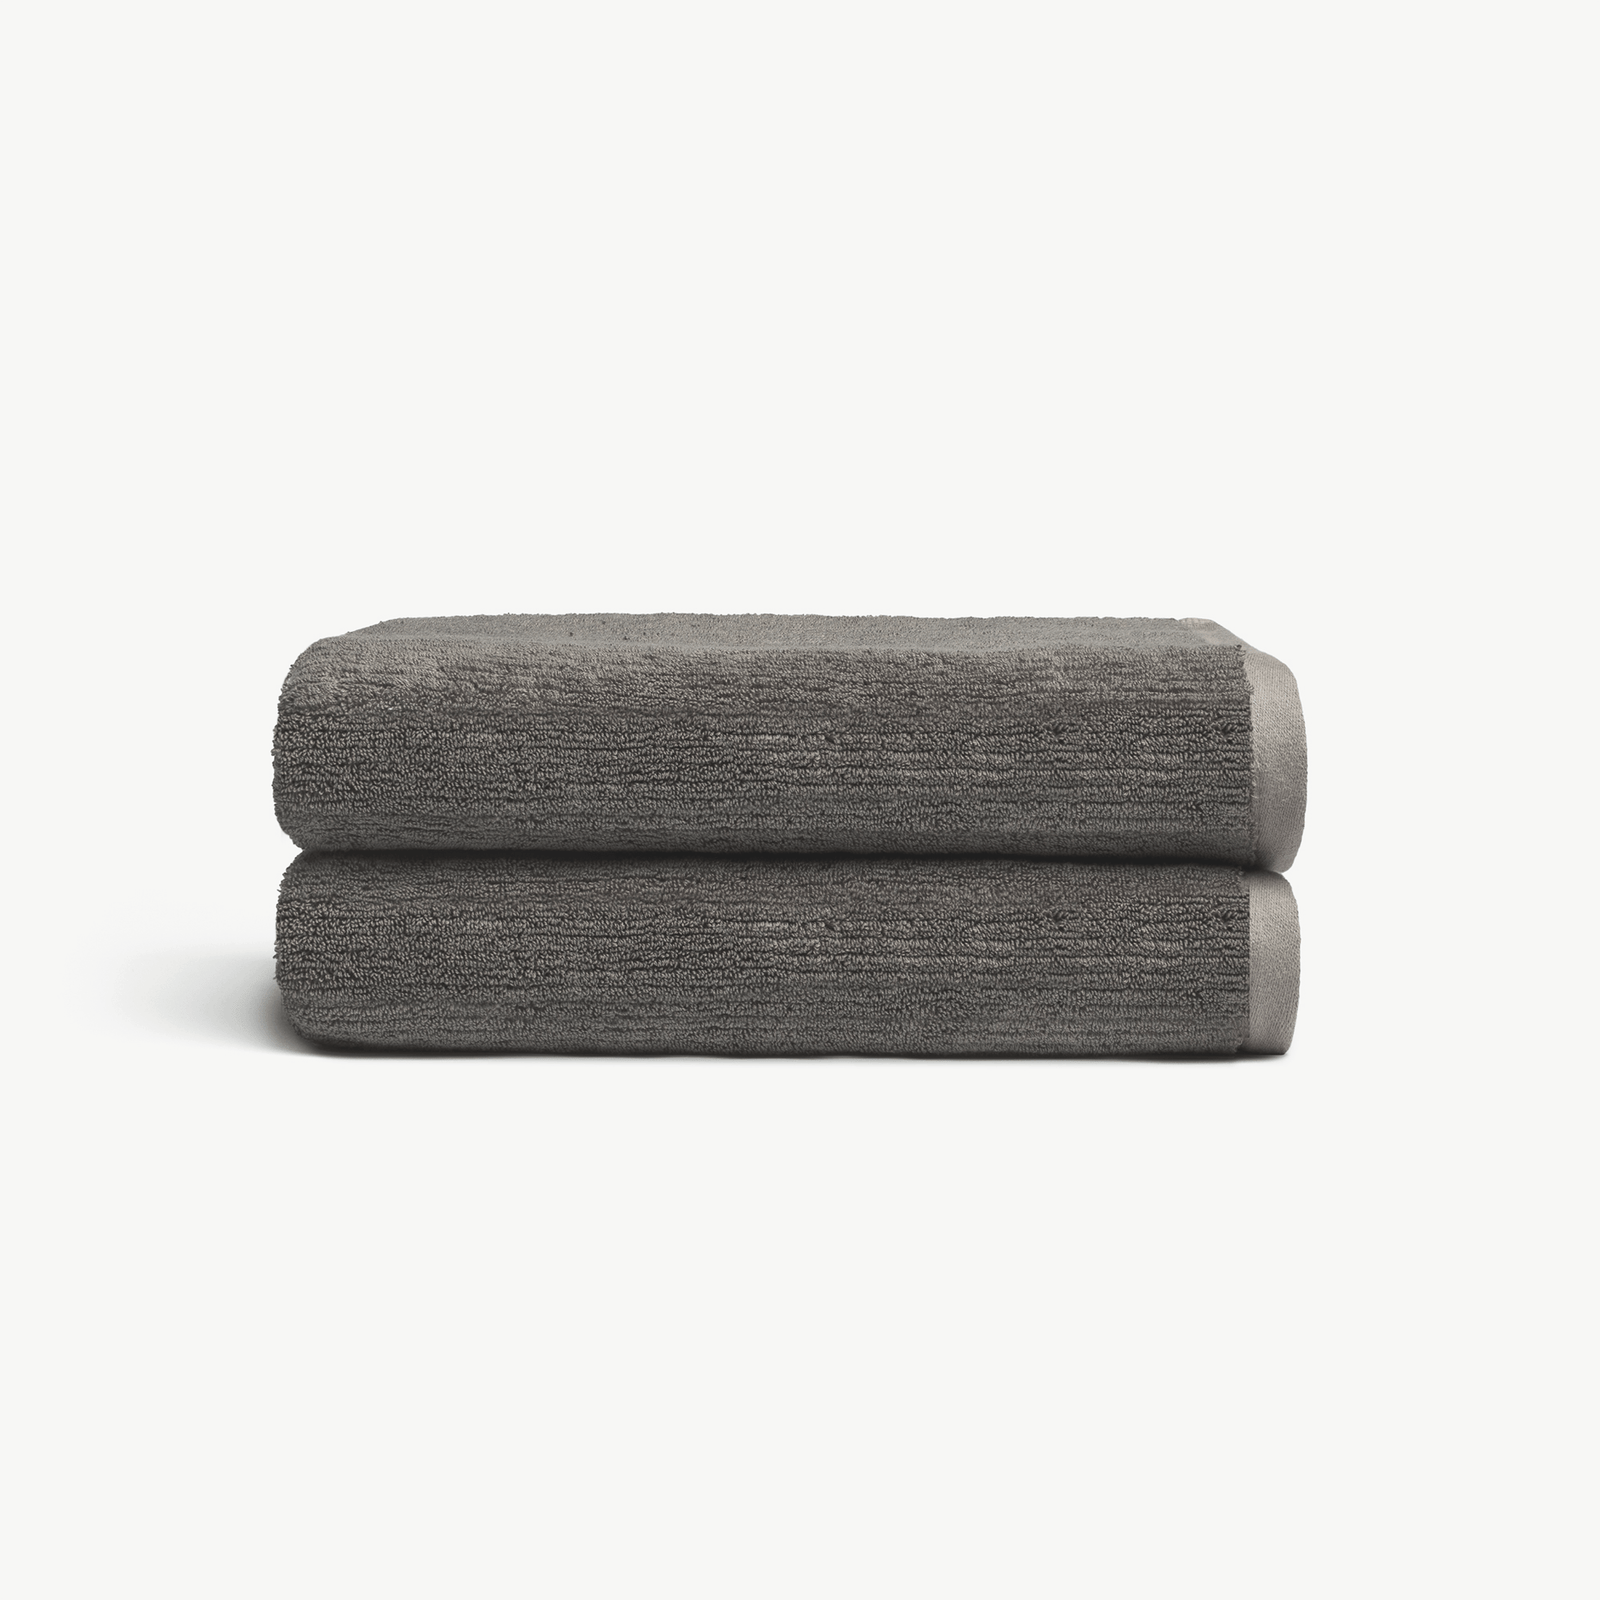 Ribbed Terry Bath Towels in the color Charcoal. Photo of Charcoal Waffle Bath Towels taken with white background. 